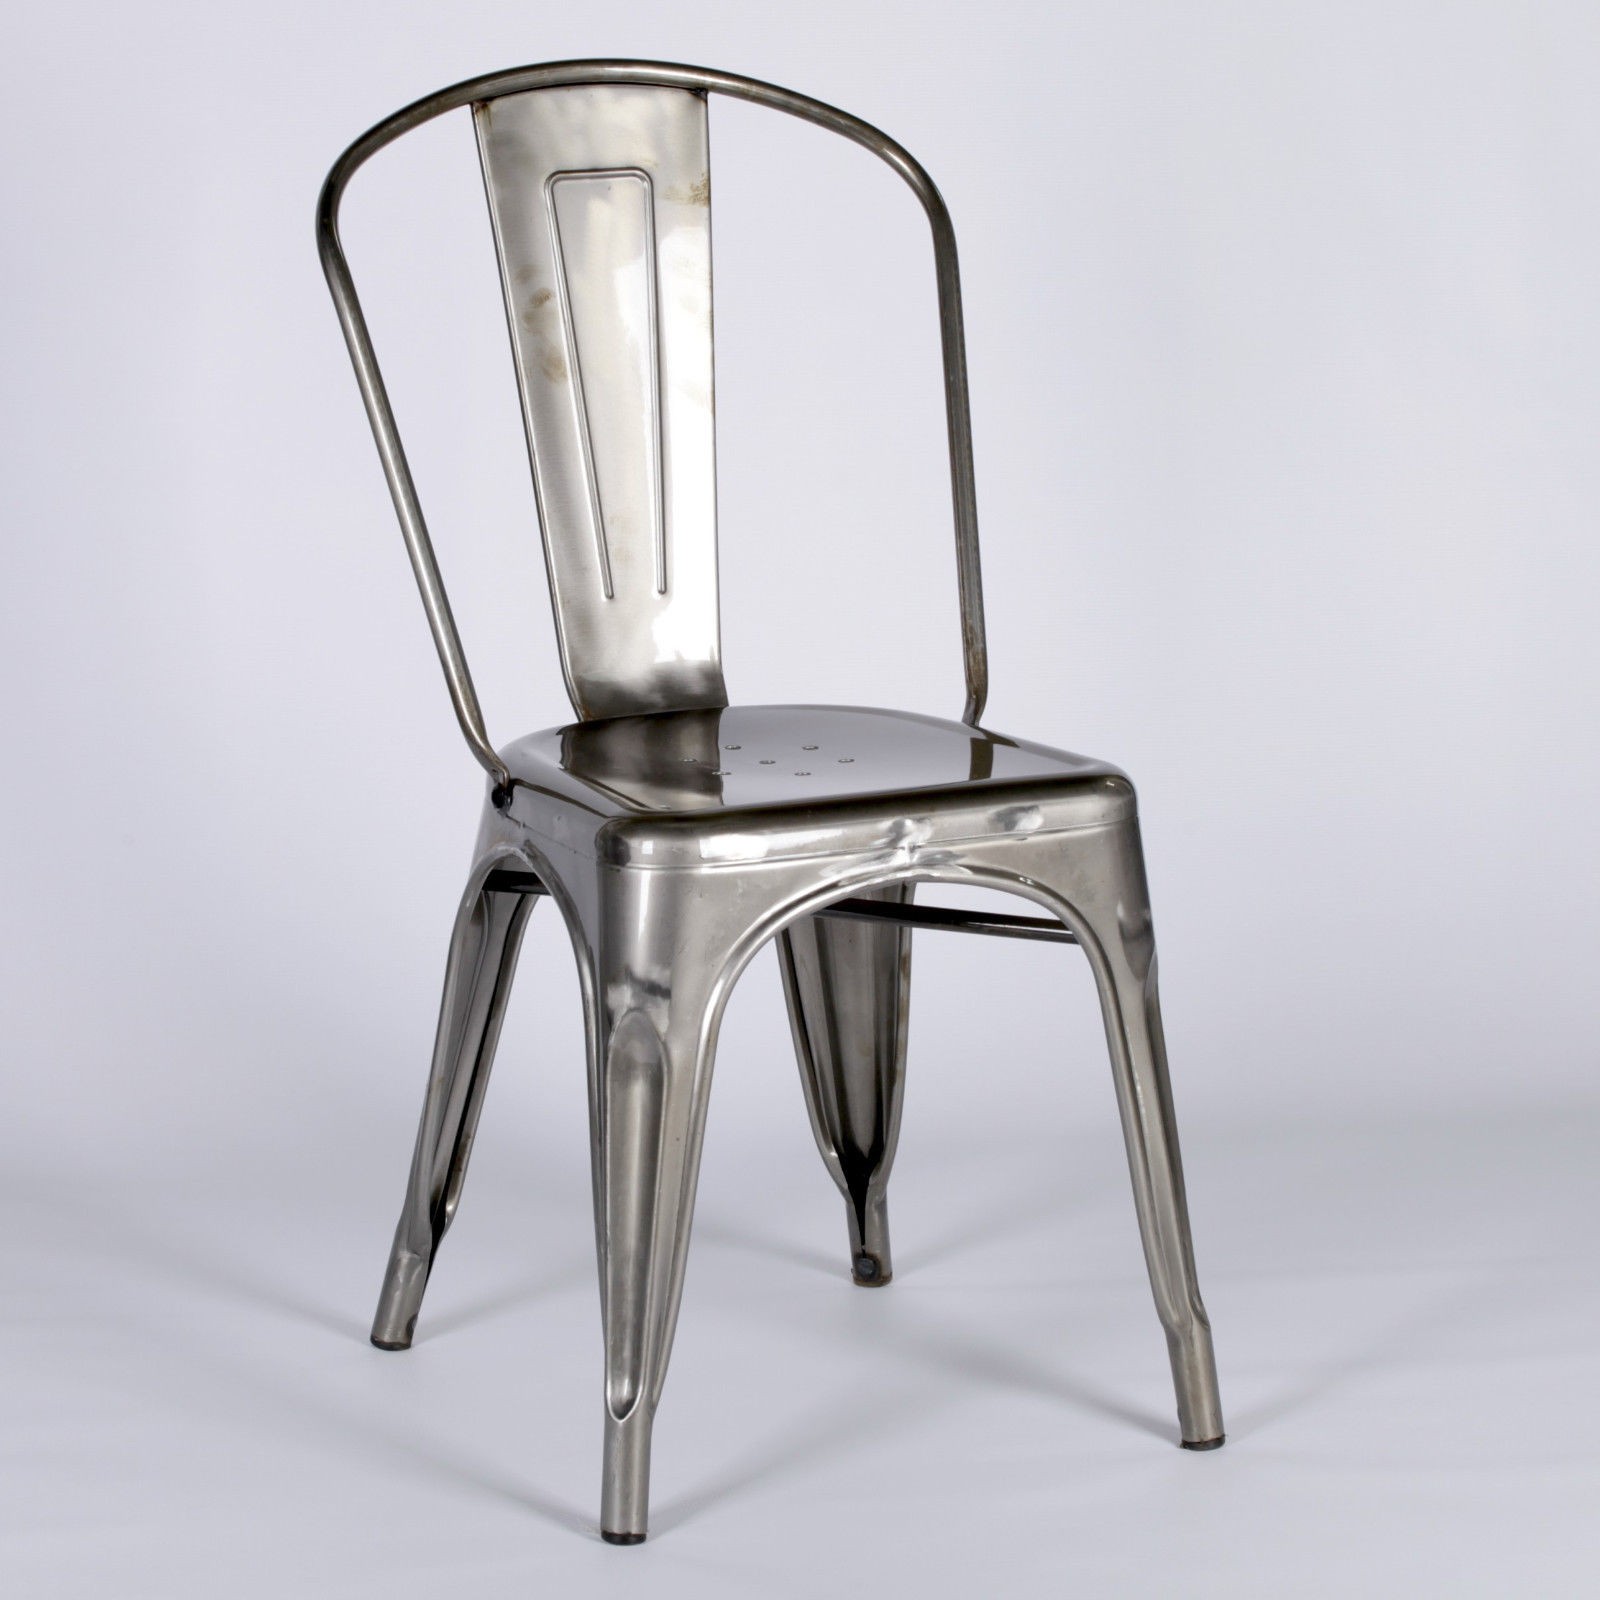 Metal dining chairs industrial